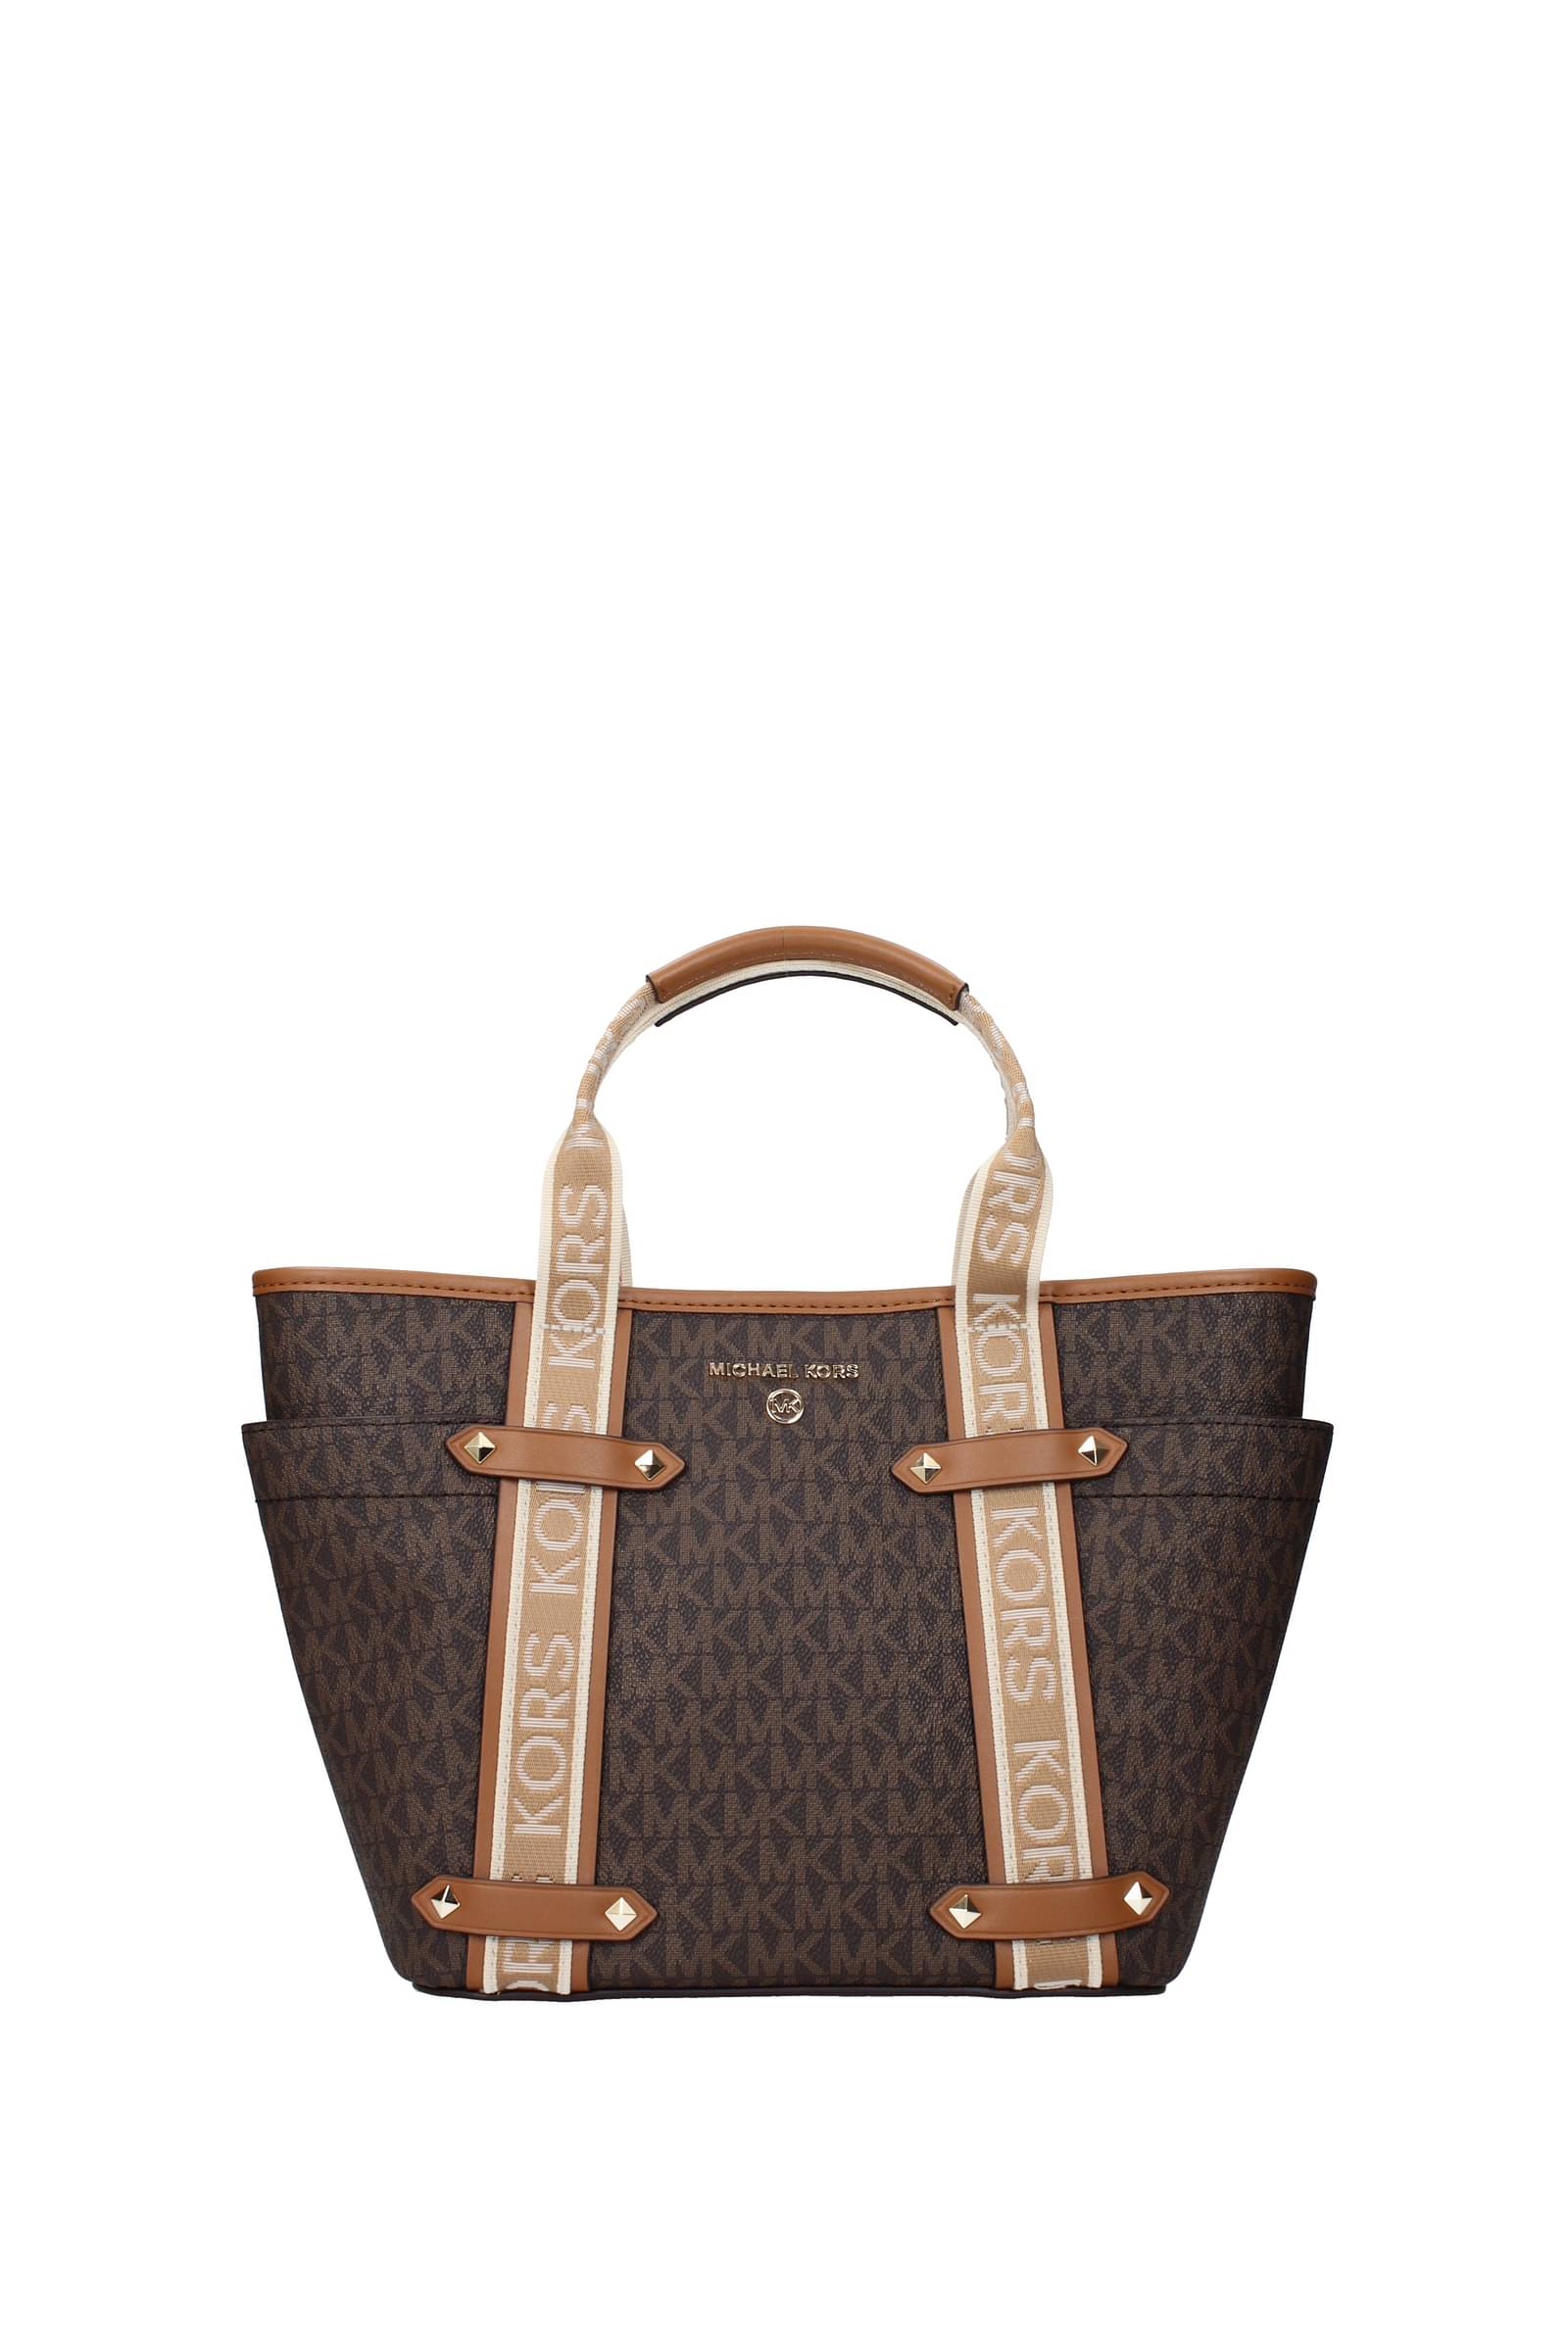 Michael Kors Outlet tote bags for women  Black  Michael Kors tote bags  30S2G6AT2L online on GIGLIOCOM